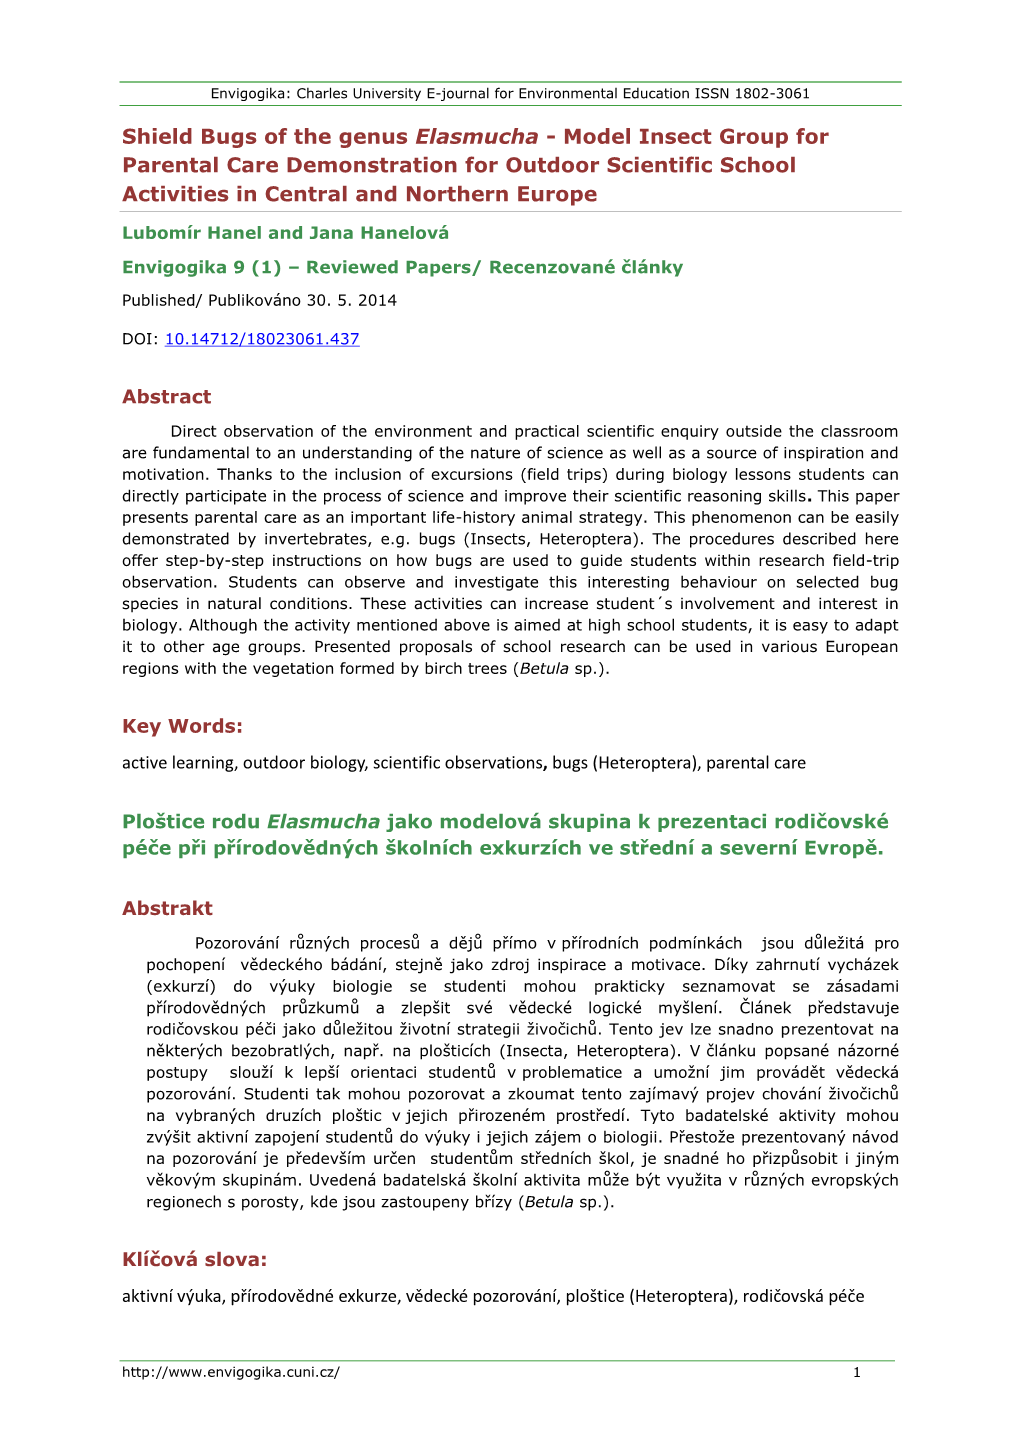 Shield Bugs of the Genus Elasmucha - Model Insect Group for Parental Care Demonstration for Outdoor Scientific School Activities in Central and Northern Europe